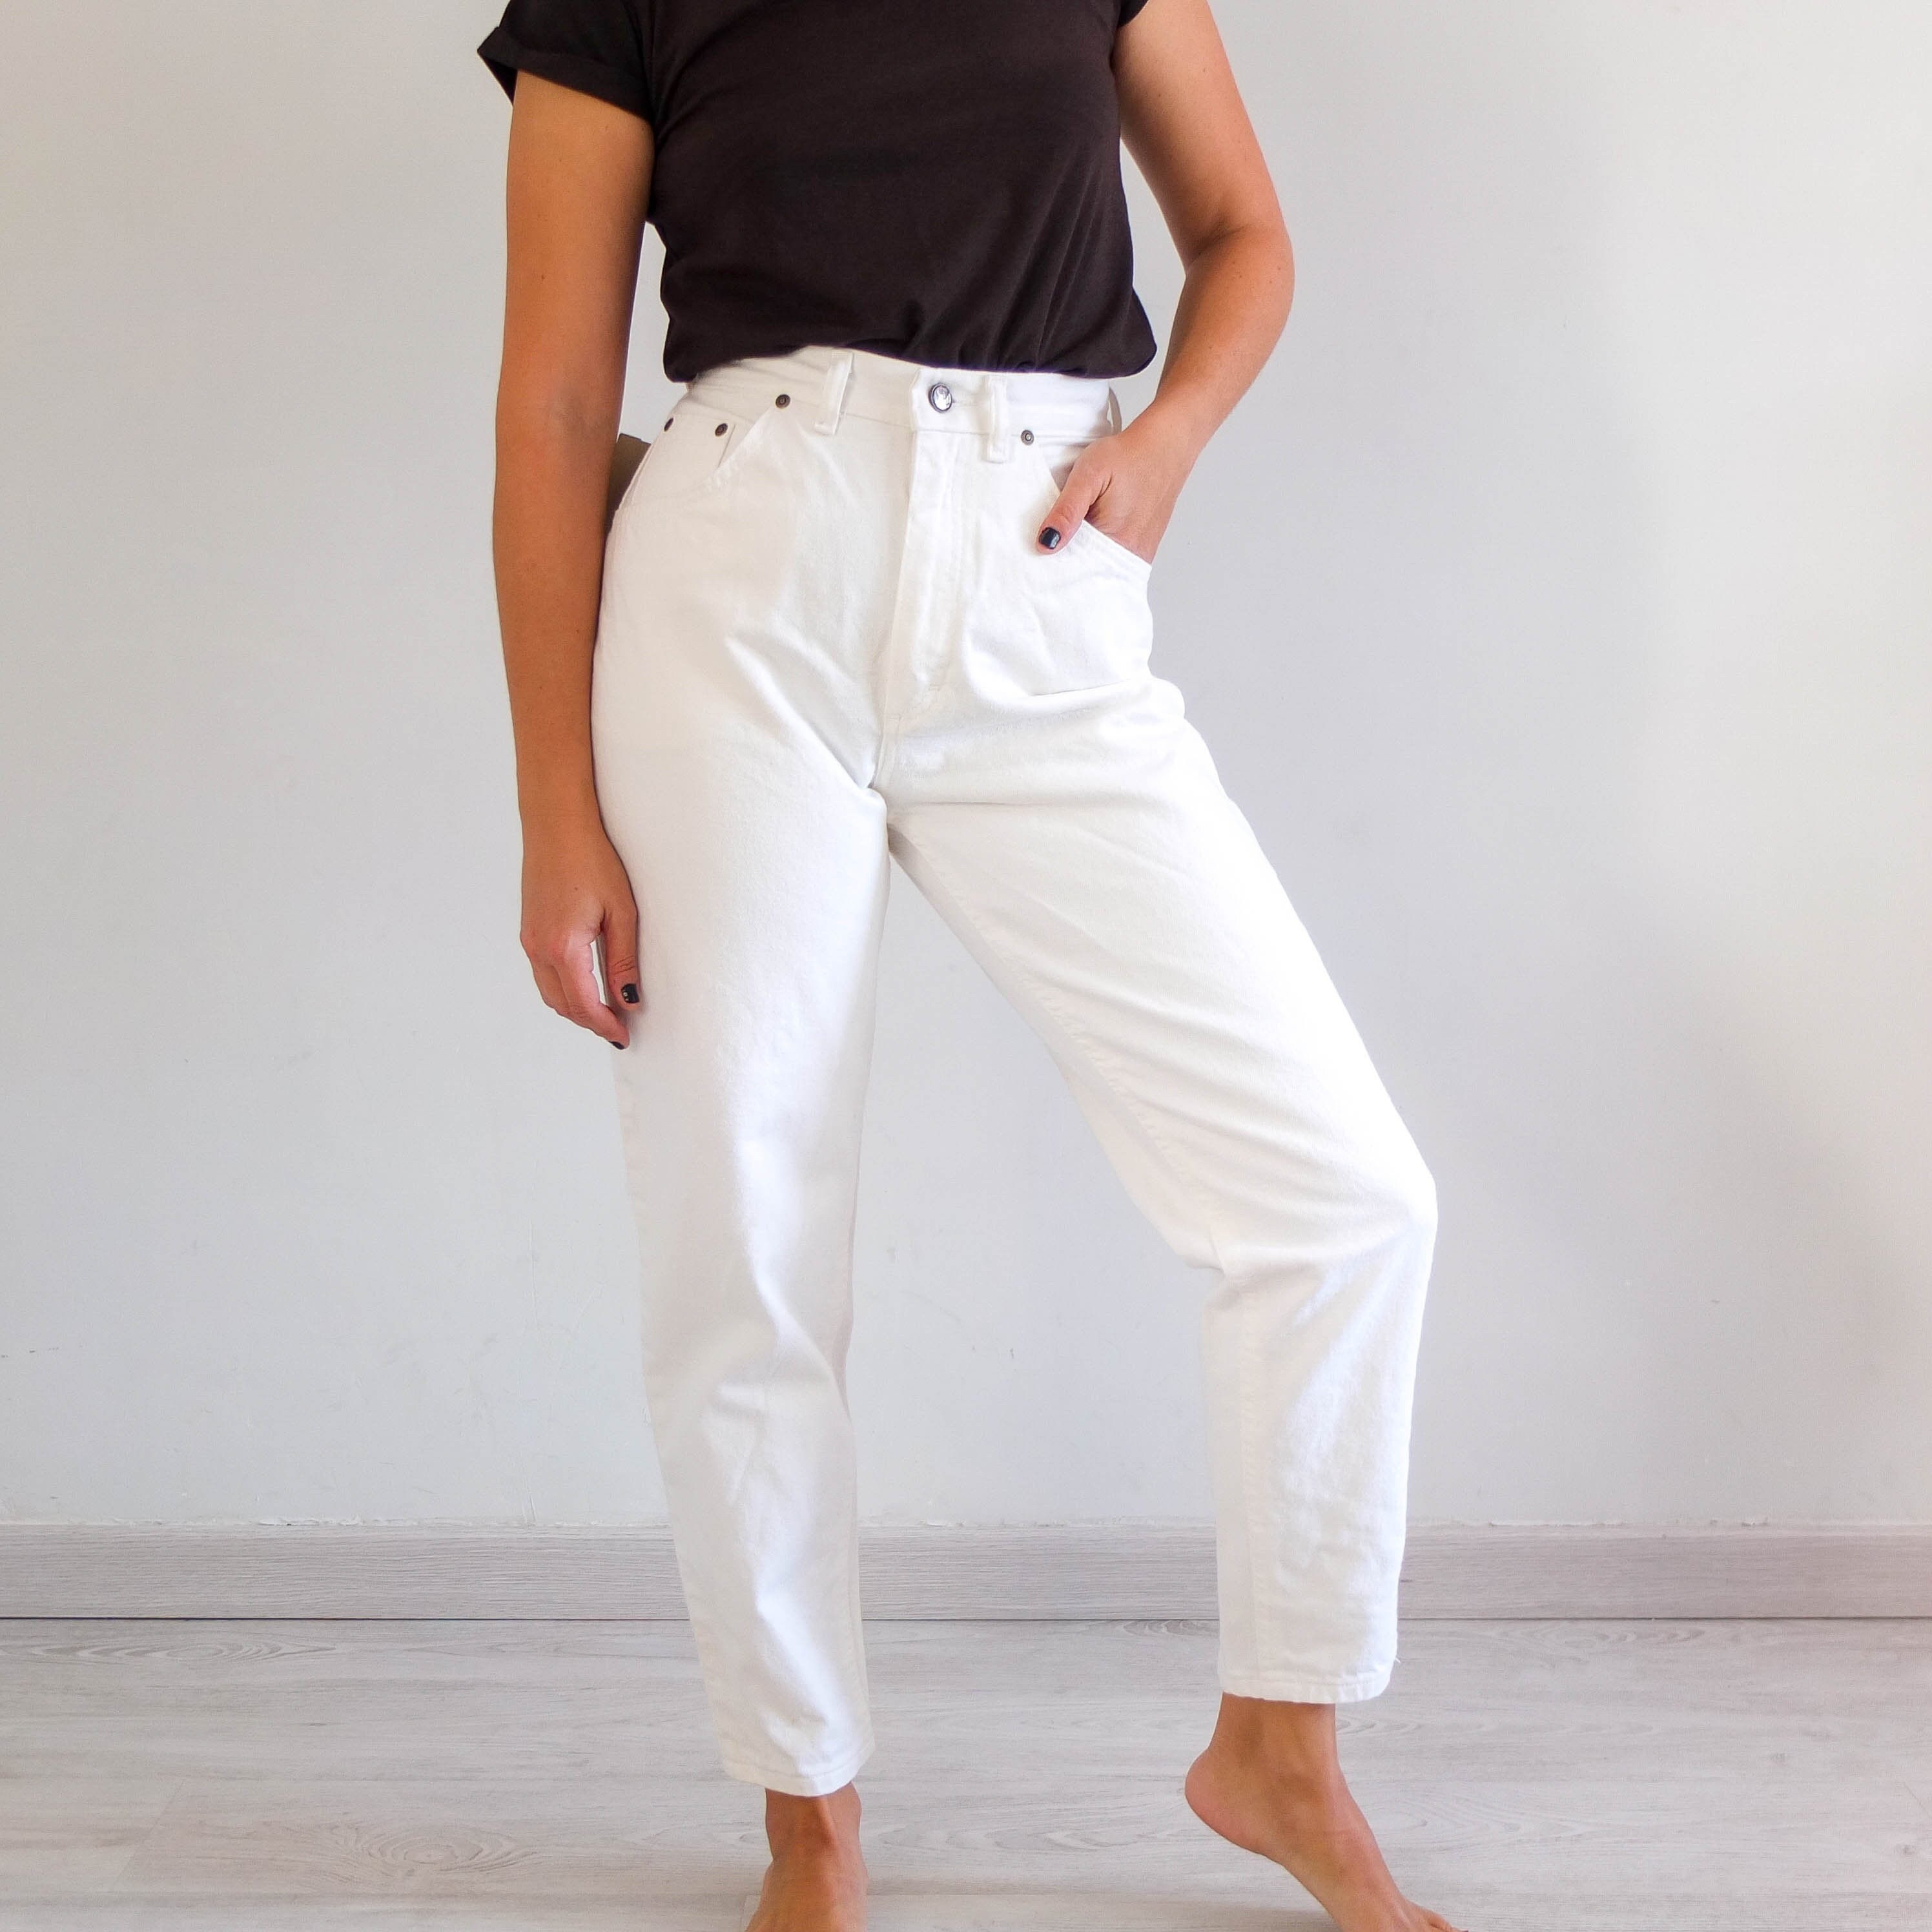 Vintage 80s Plus Size Deadstock Mom Jeans, High Waisted Tapered Jeans W33,  80s Girlfriend Jeans, Vintage Women Jeans Size XL, 80s 90s Jeans 